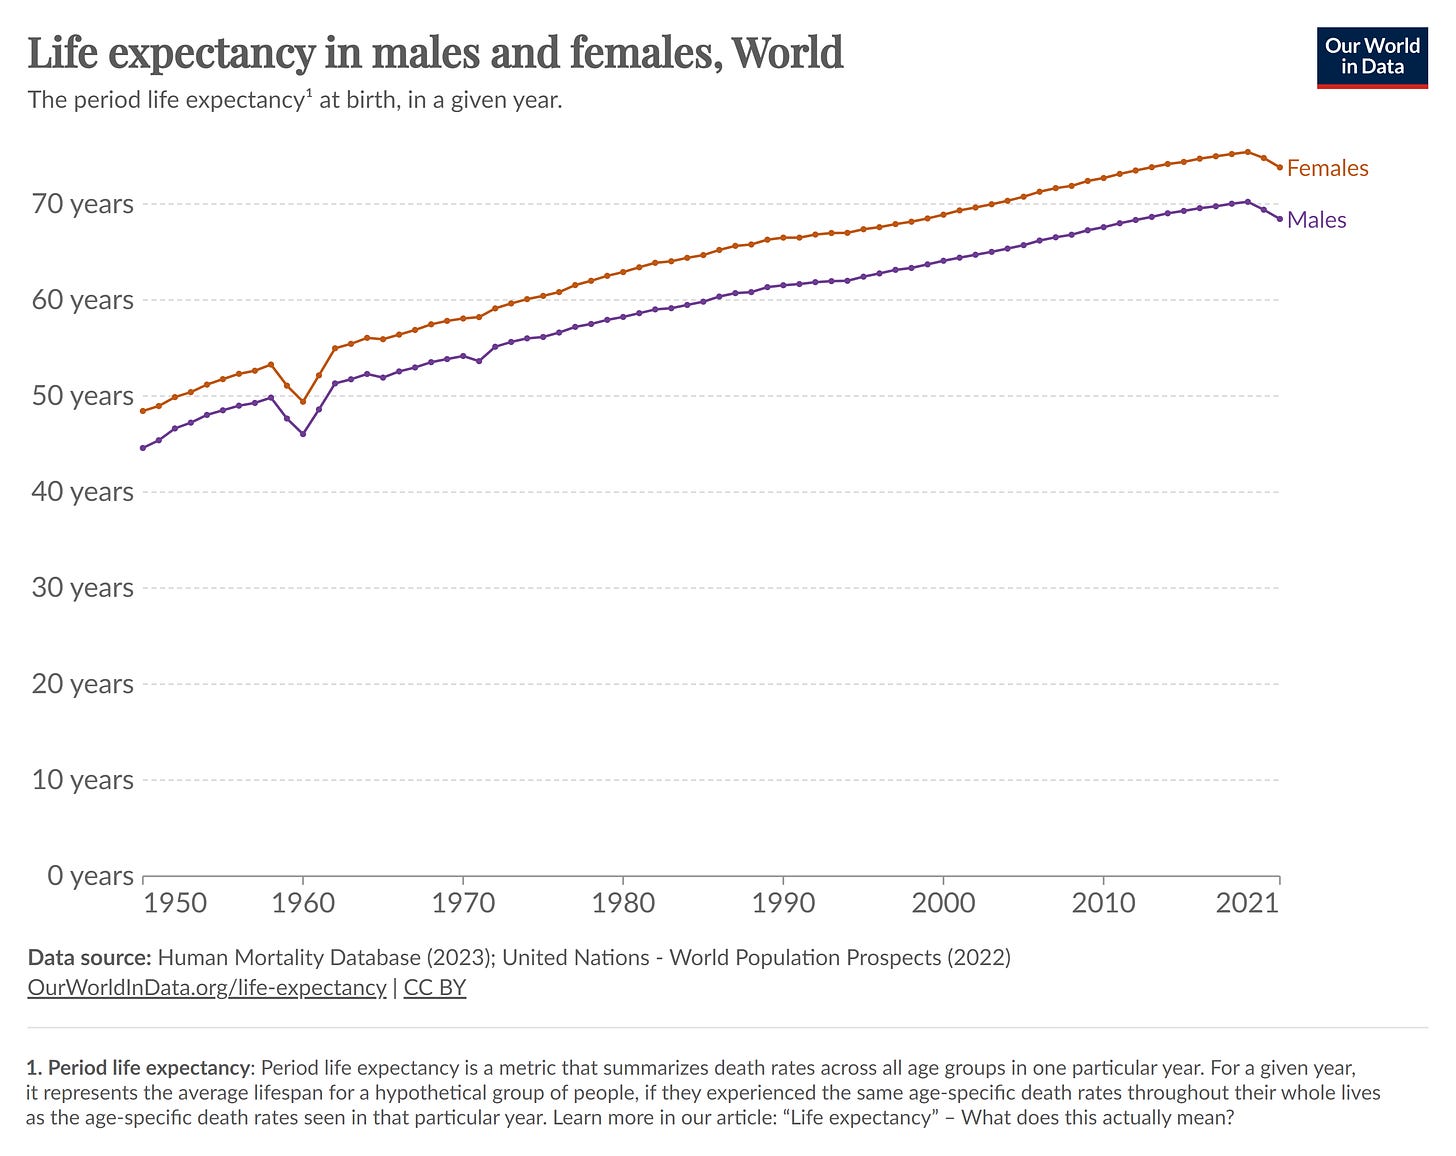 Figure D - Life Expectation At Birth By Sex (Source Our World in Data